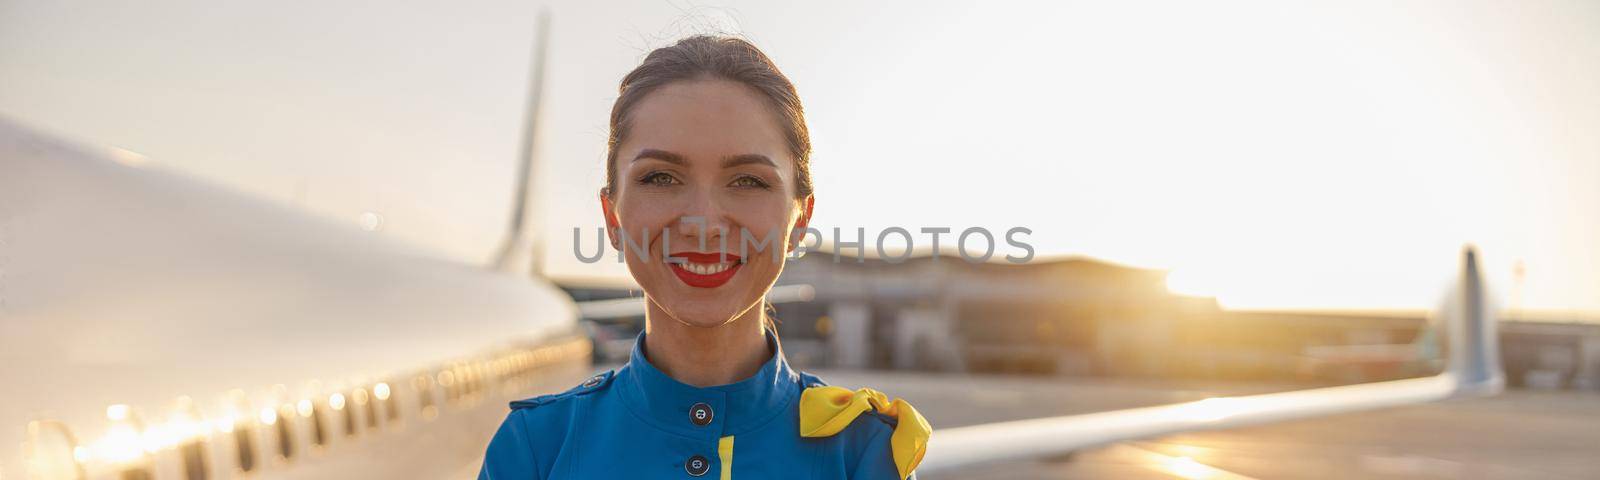 Portrait of beautiful air stewardess with red lips in blue uniform smiling at camera, posing outdoors with commercial airplane near the terminal in an airport in the background by Yaroslav_astakhov